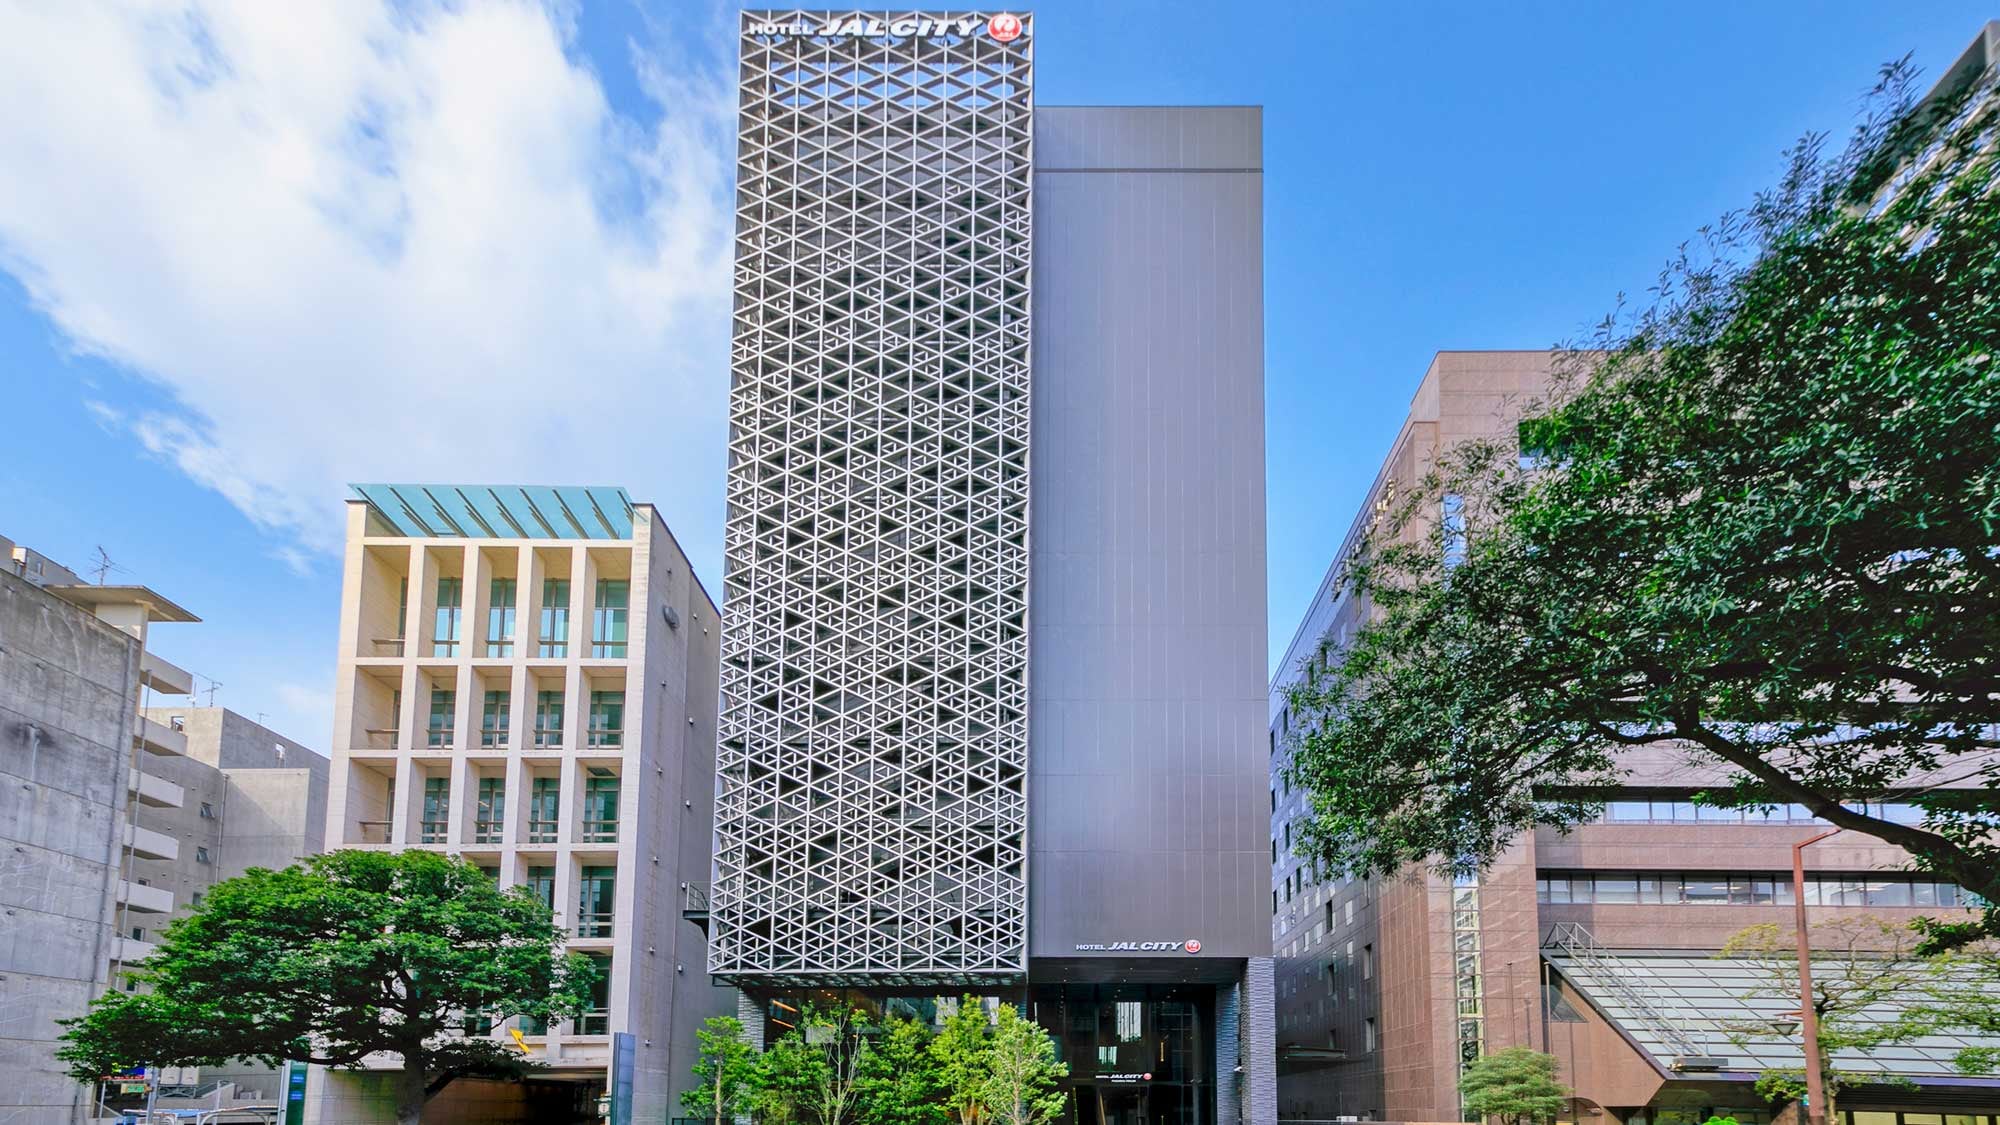 [Exterior] Excellent access to Fukuoka Airport, Hakata Station, and event venues in the Bay Area